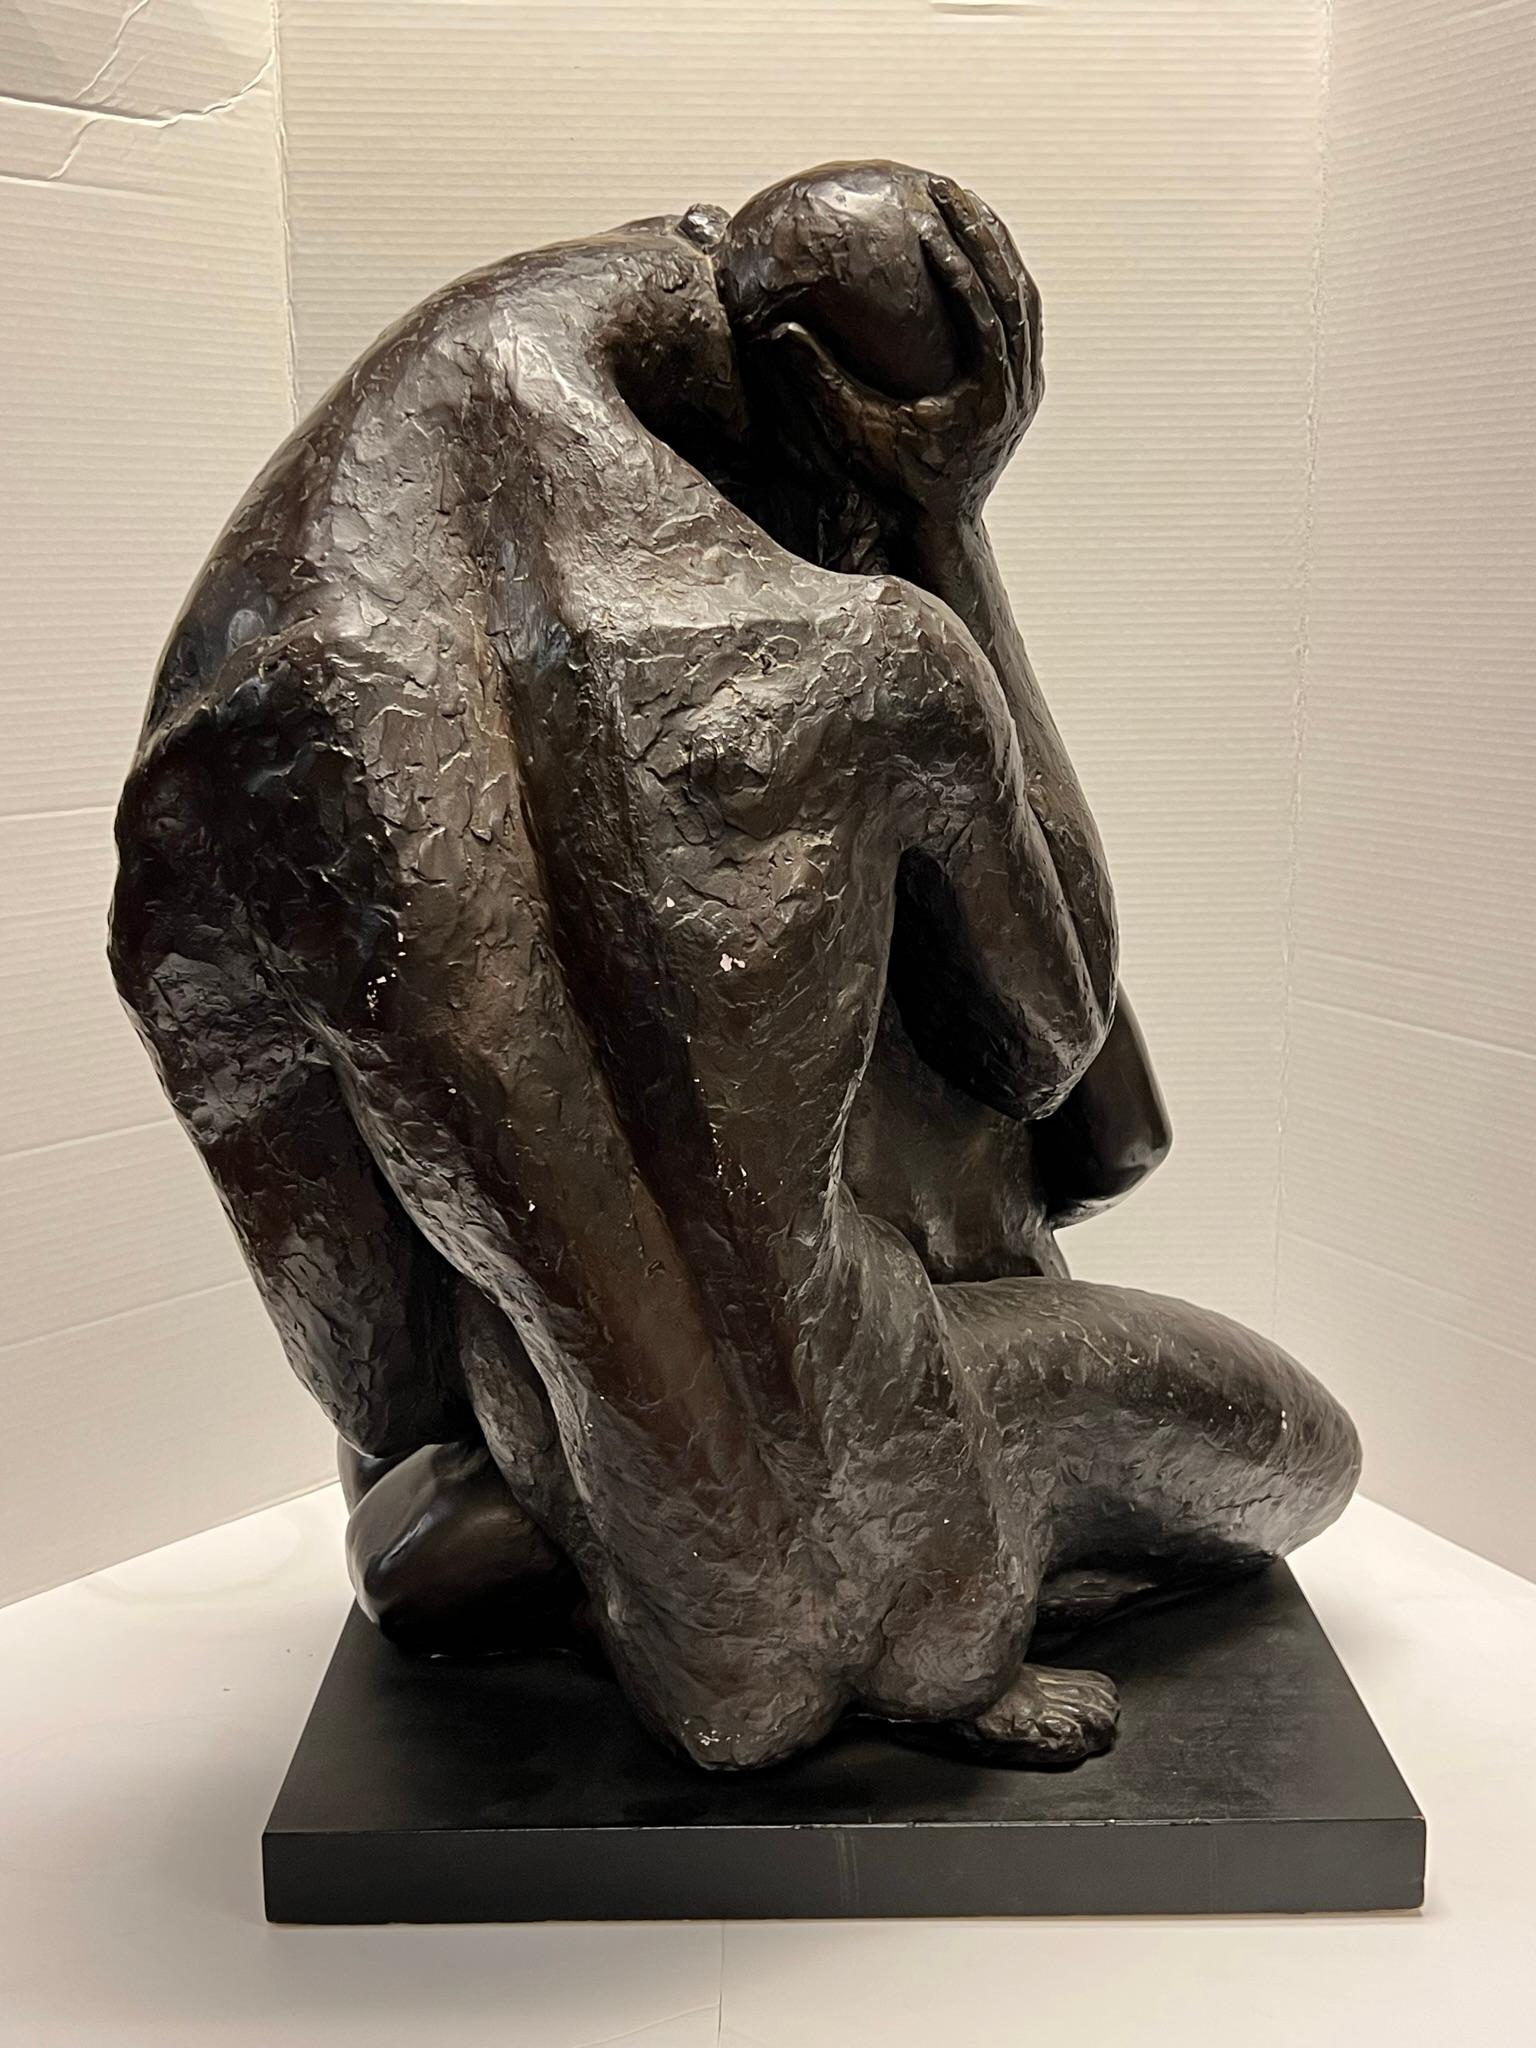 American Abstract Figurative Sculpture by Manuel Carbonell (1918-2011)